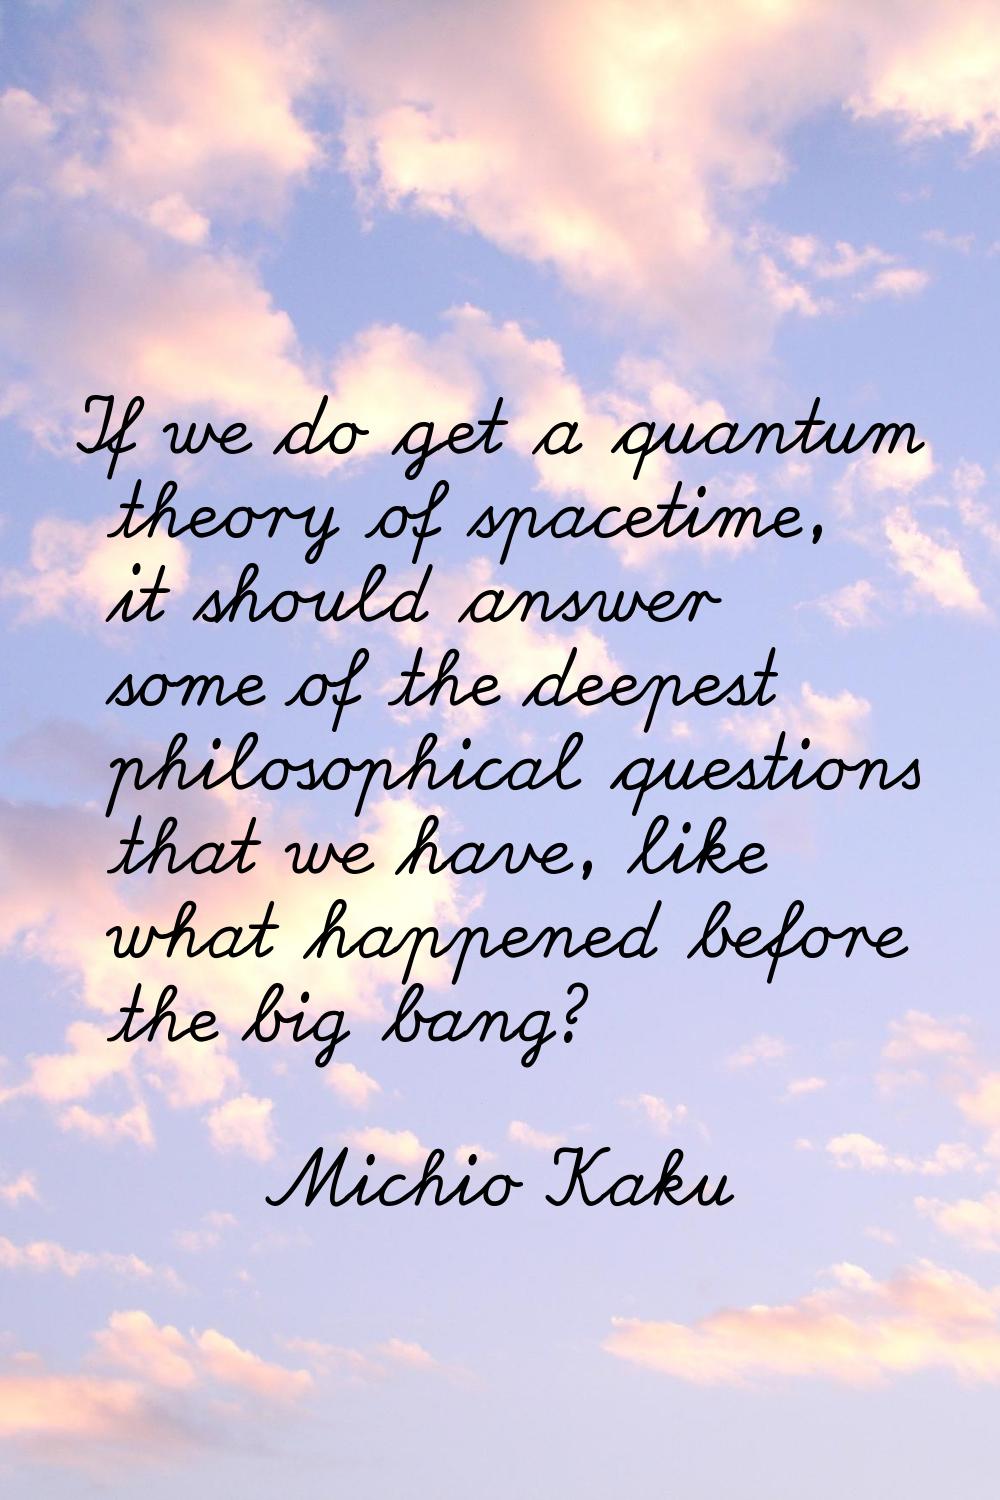 If we do get a quantum theory of spacetime, it should answer some of the deepest philosophical ques